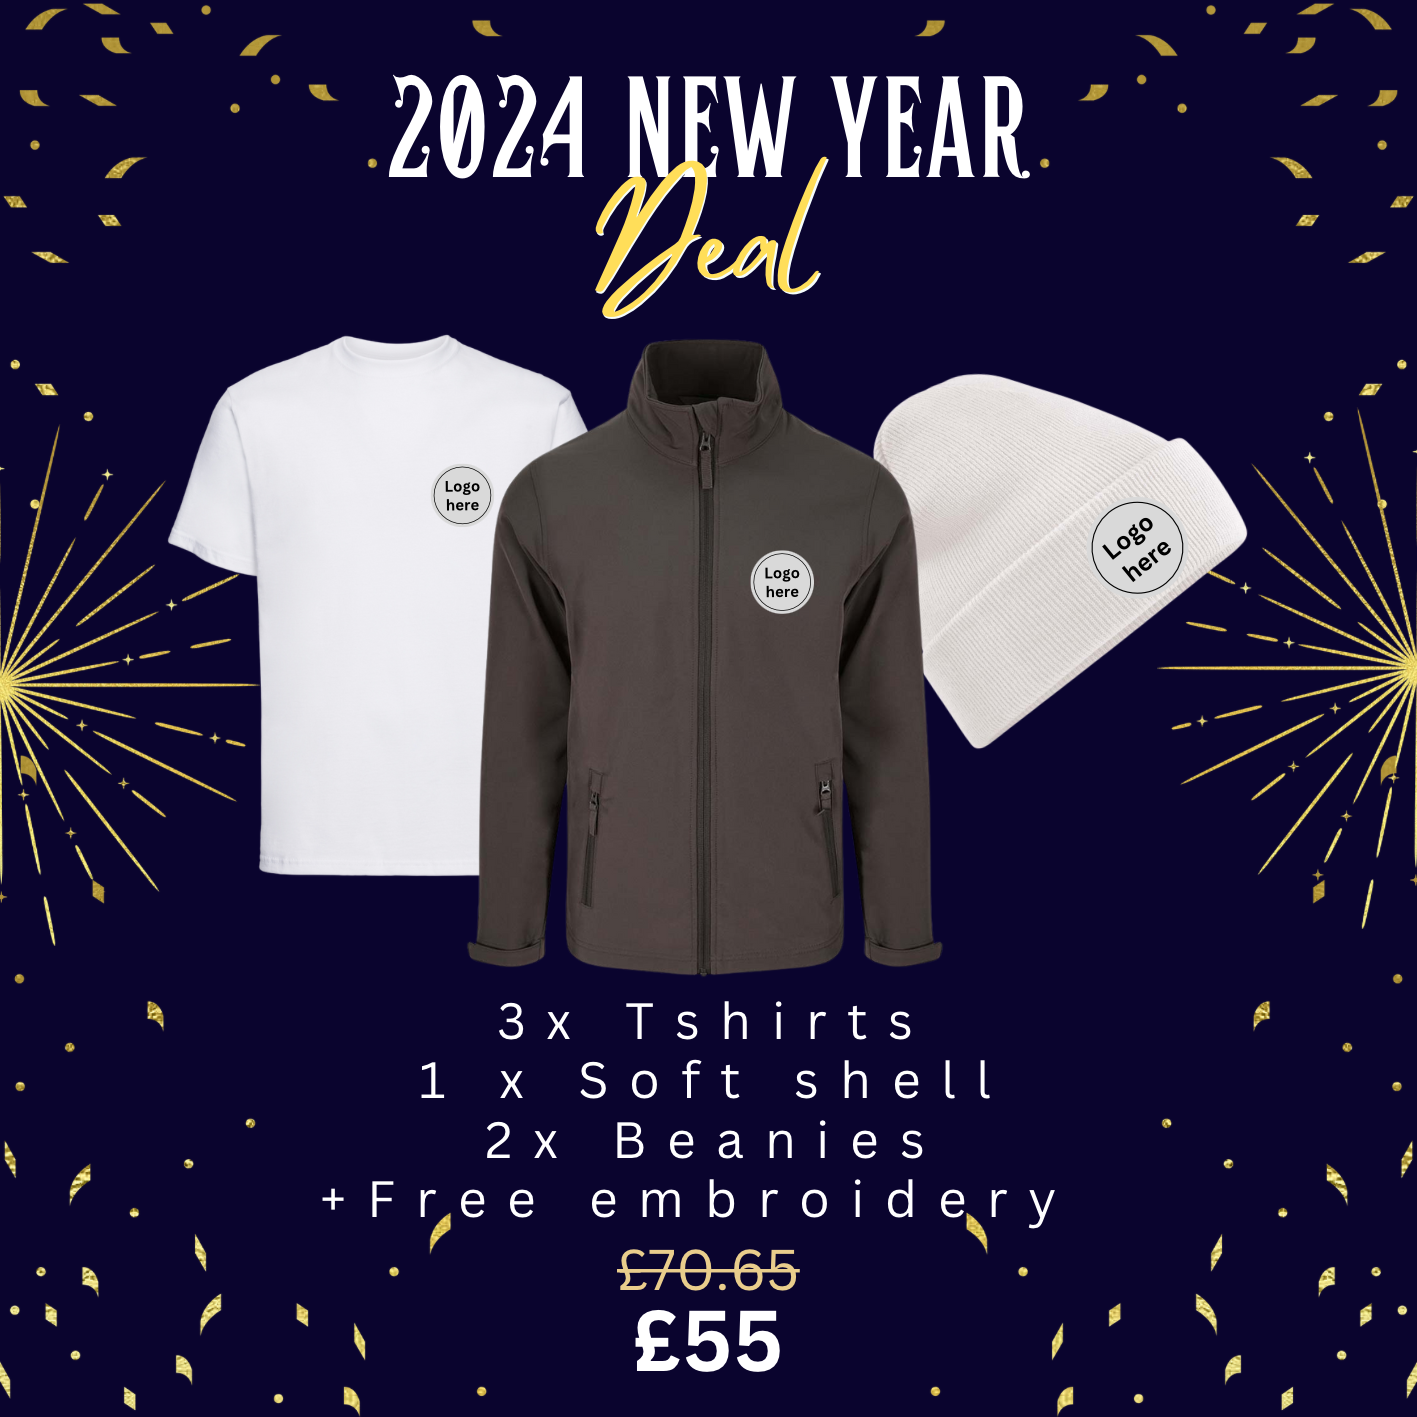 2024 New Year Deal